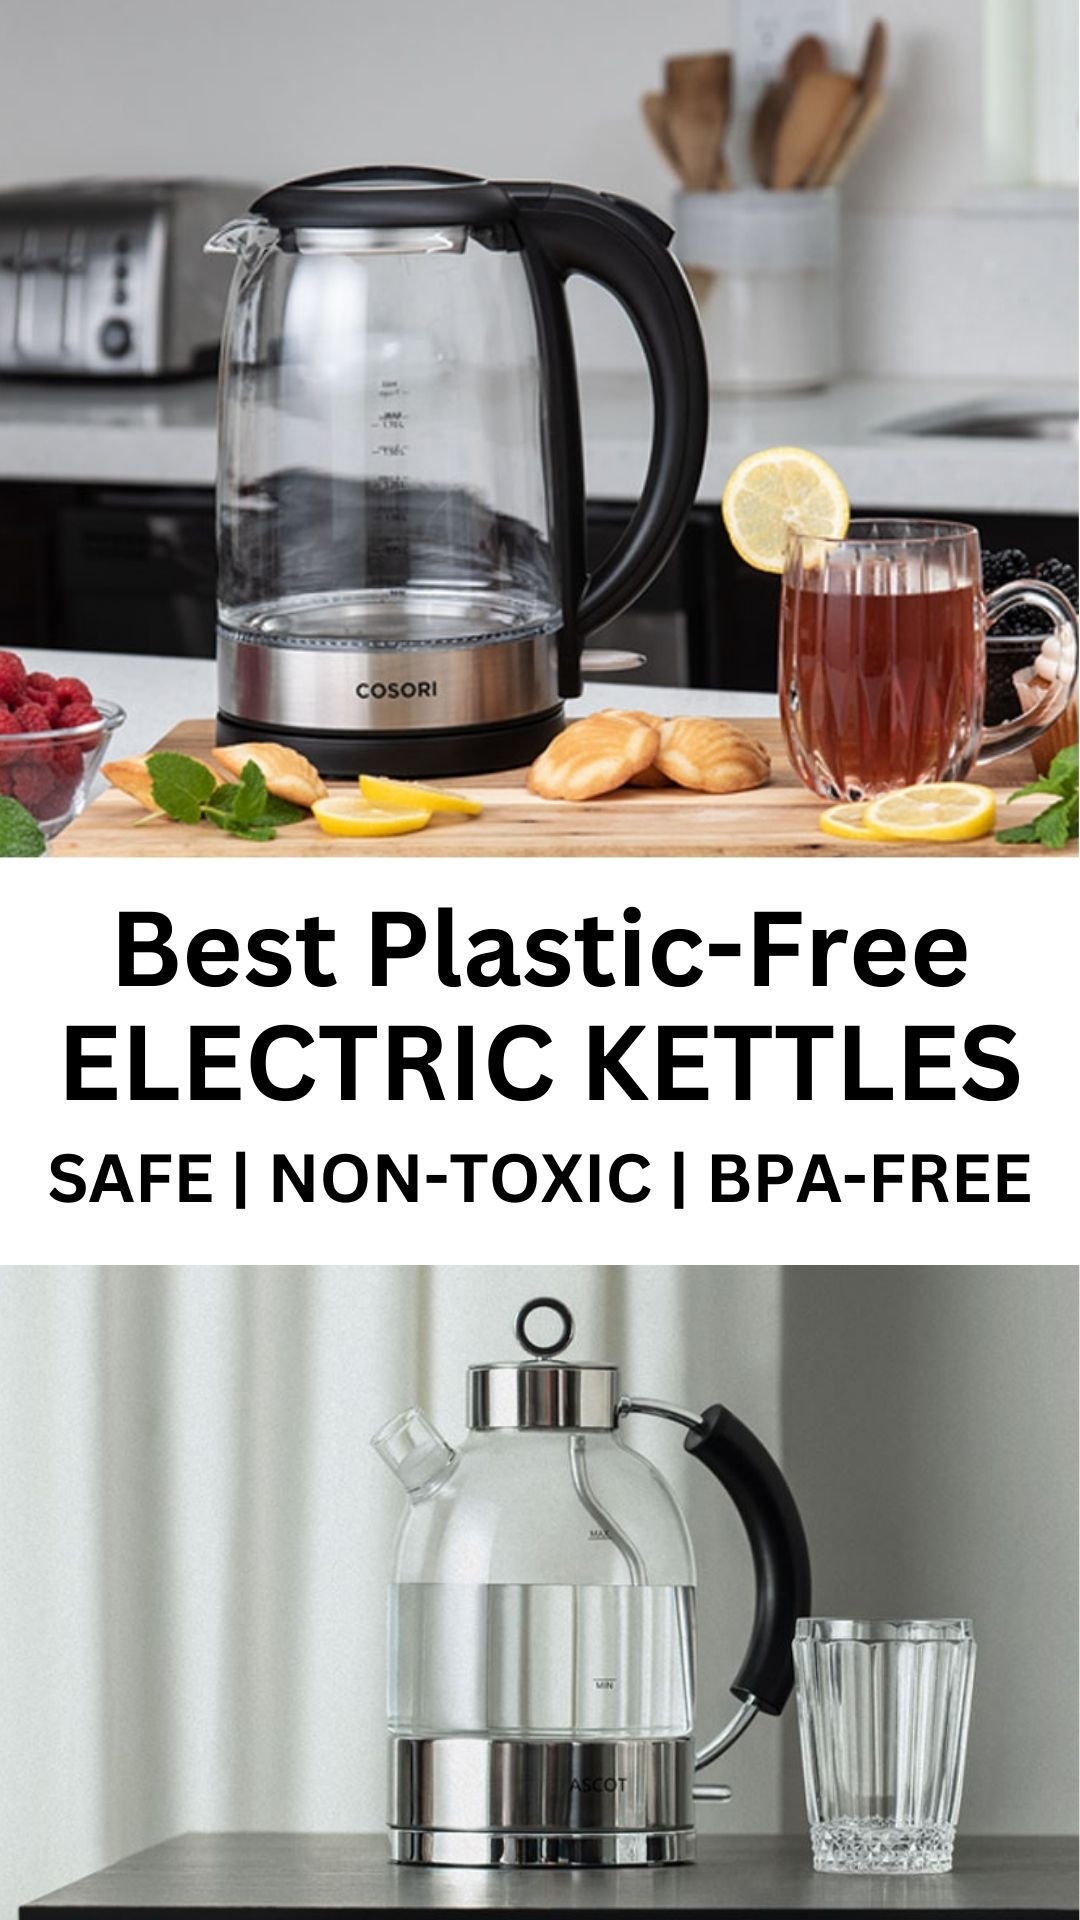 Plastic Free Electric Kettles